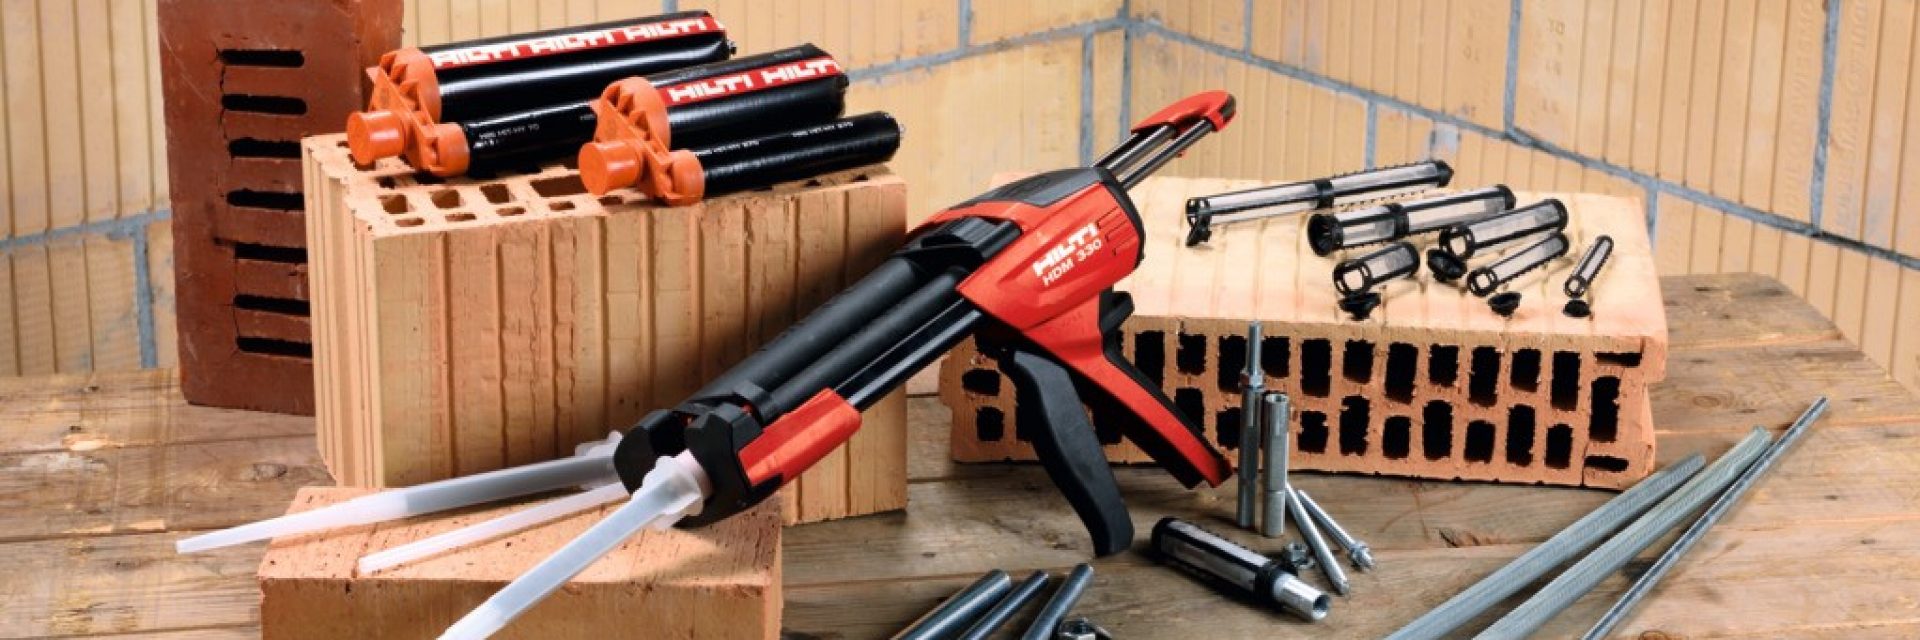 Hilti HIT-HY 270 injectable mortar for masonry design